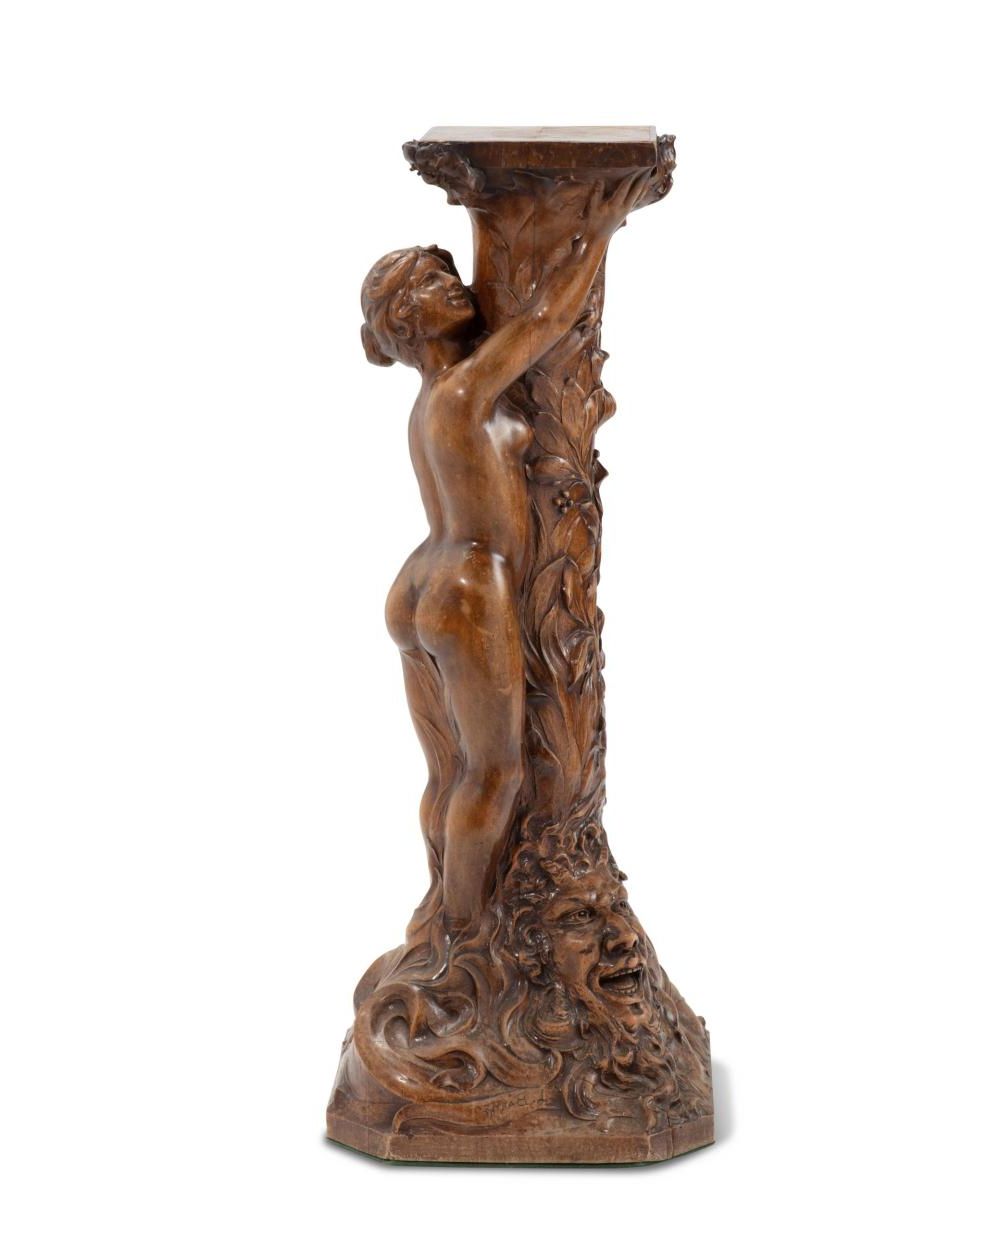 2020 Lot – An Art Nouveau Carved Wood Plant Stand With Regard To Carved Plant Stands (View 15 of 15)